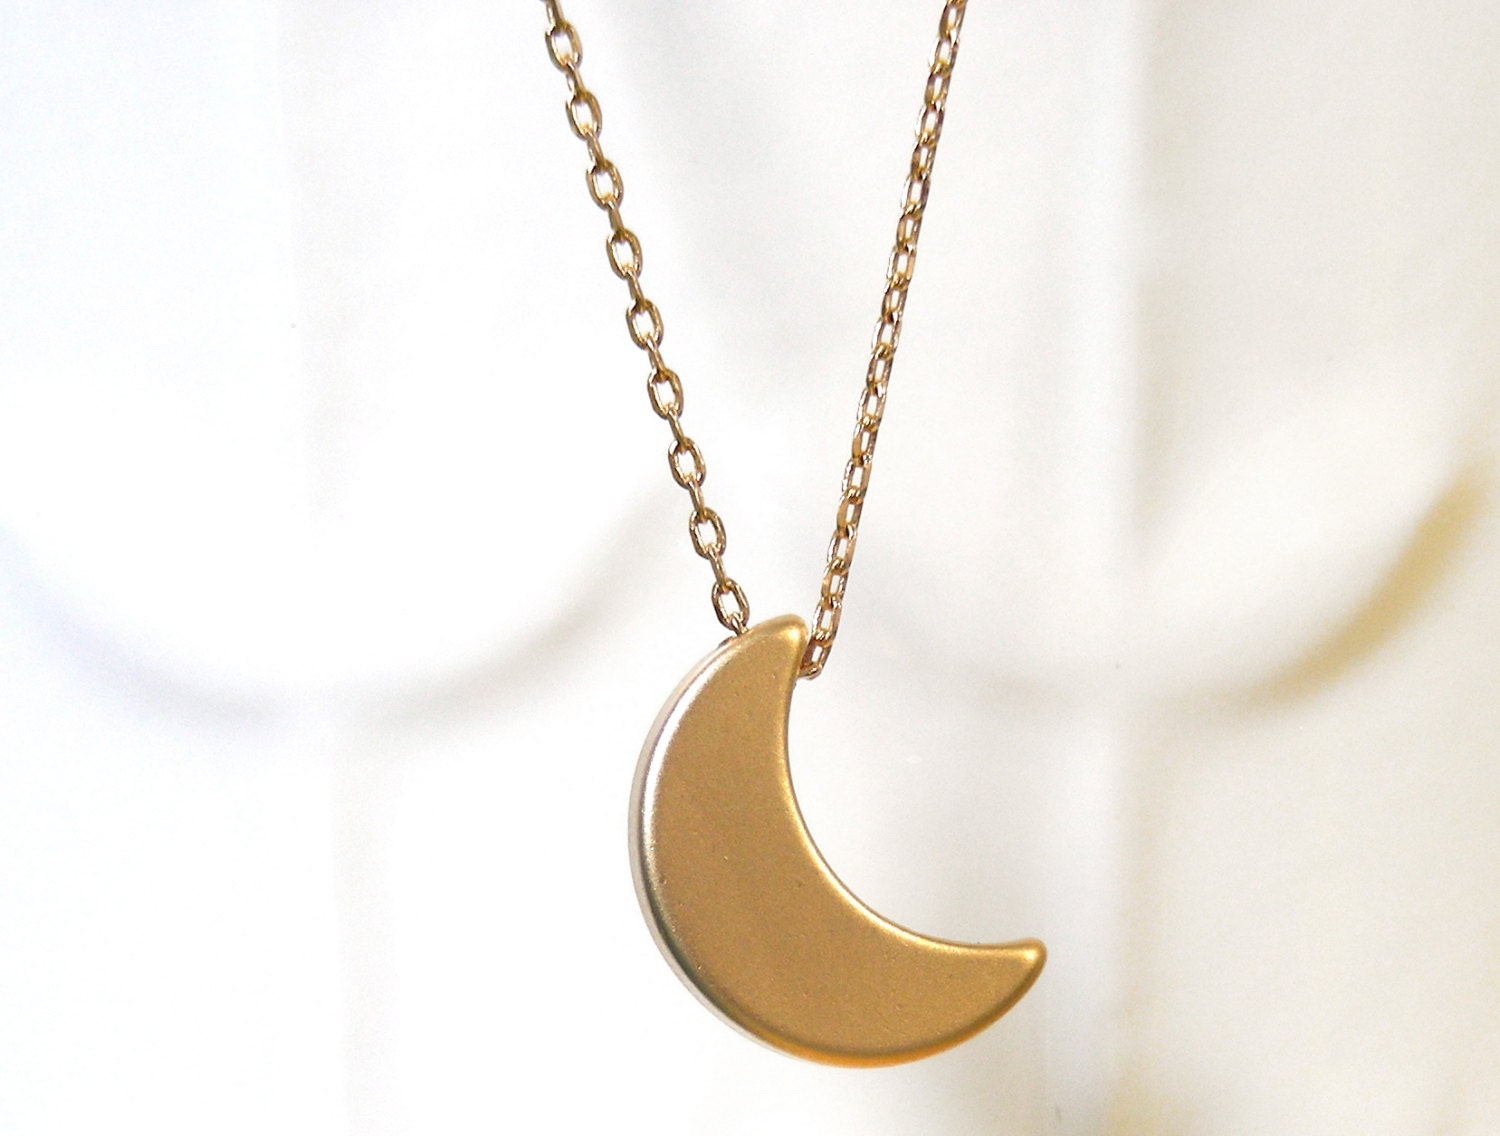 Gold Moon Necklace - Gold Matt Finish Moon Dainty Necklace - Choose Your Own Necklace Length - keneka